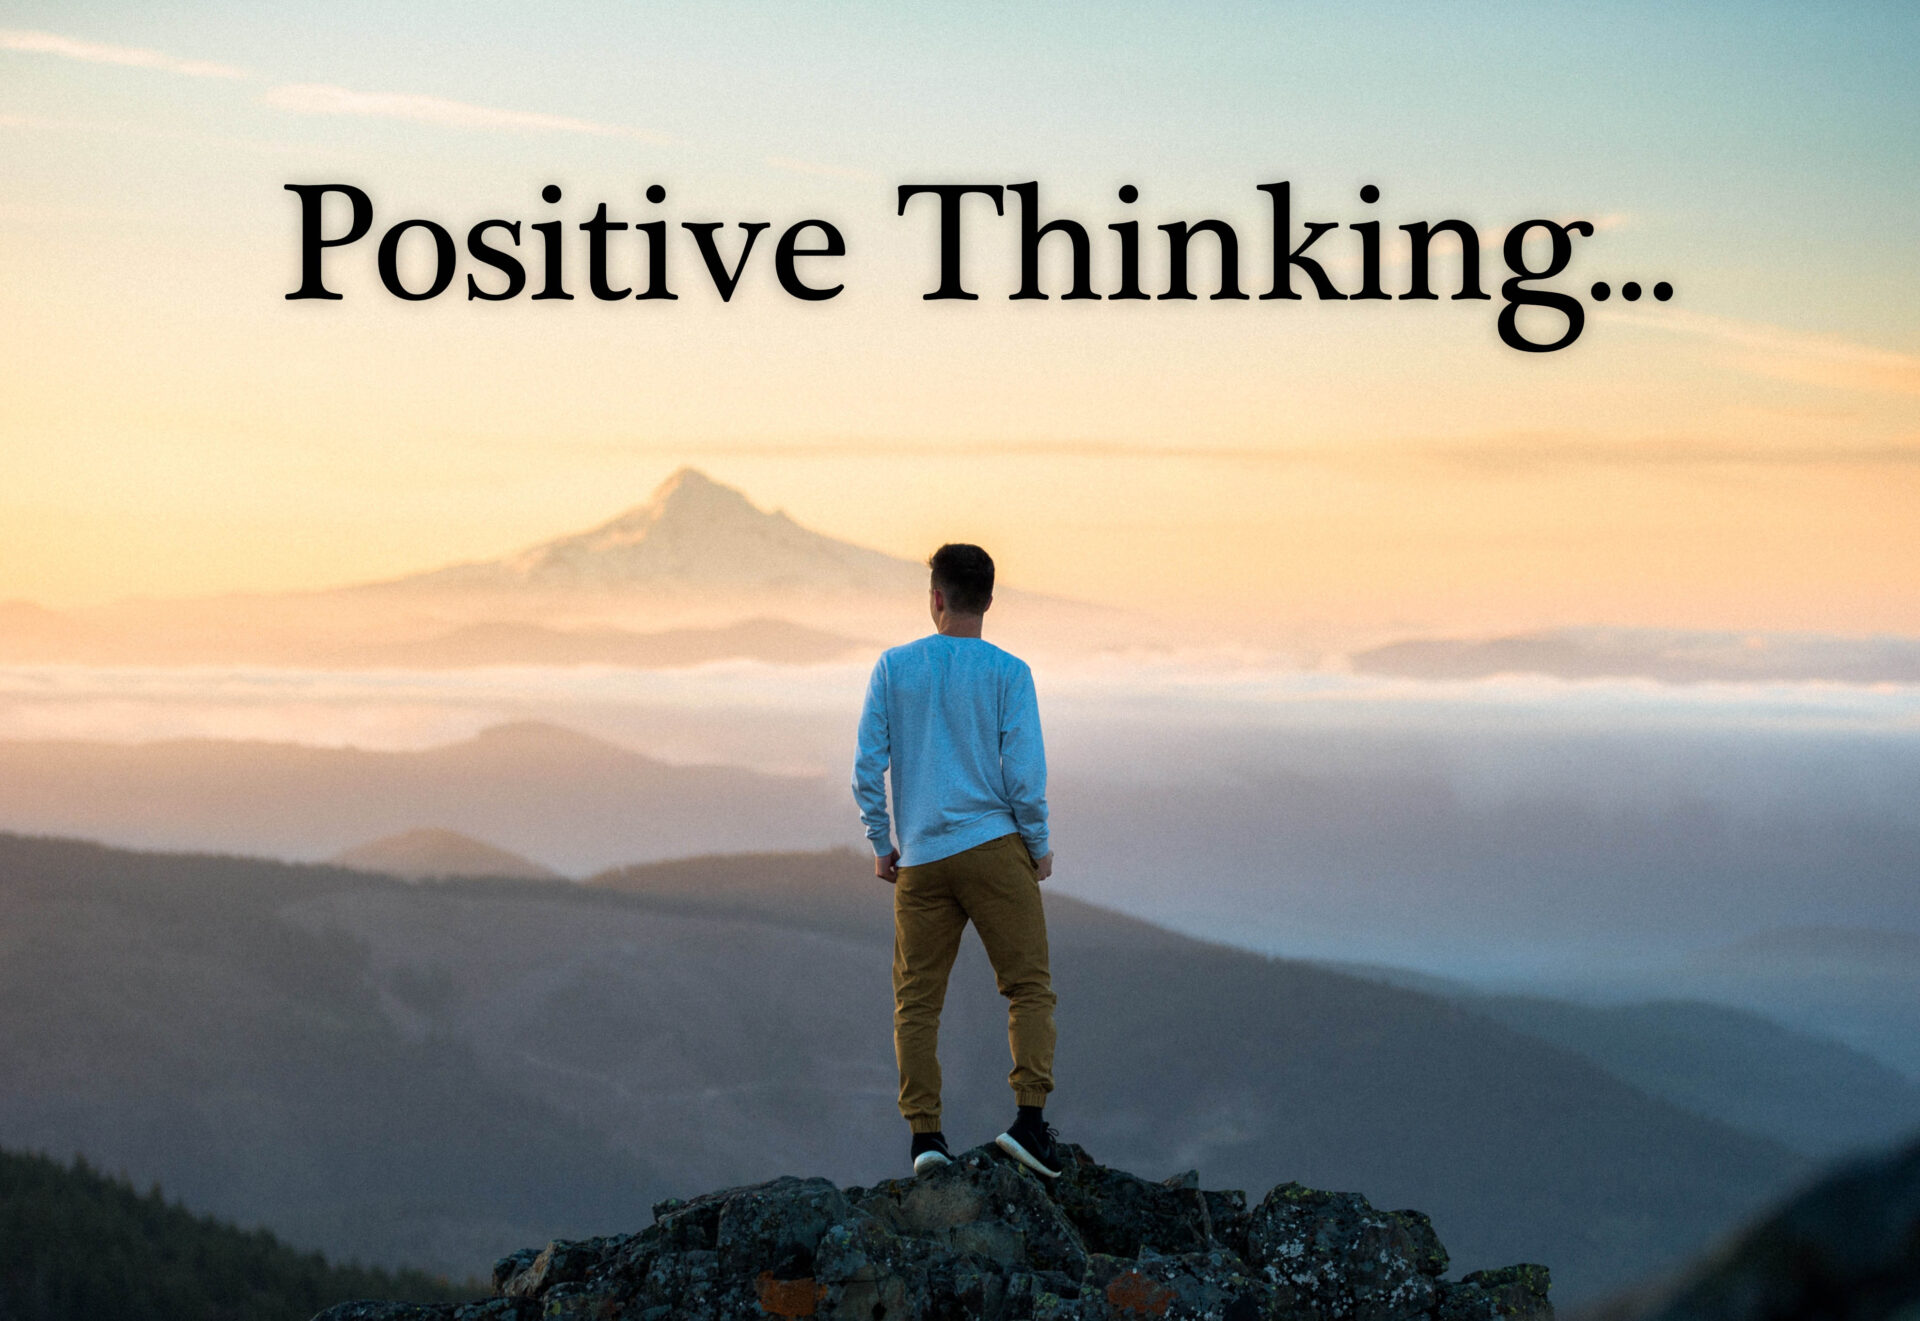 10 Examples Where the Power of Positive Thinking Kicks Ass